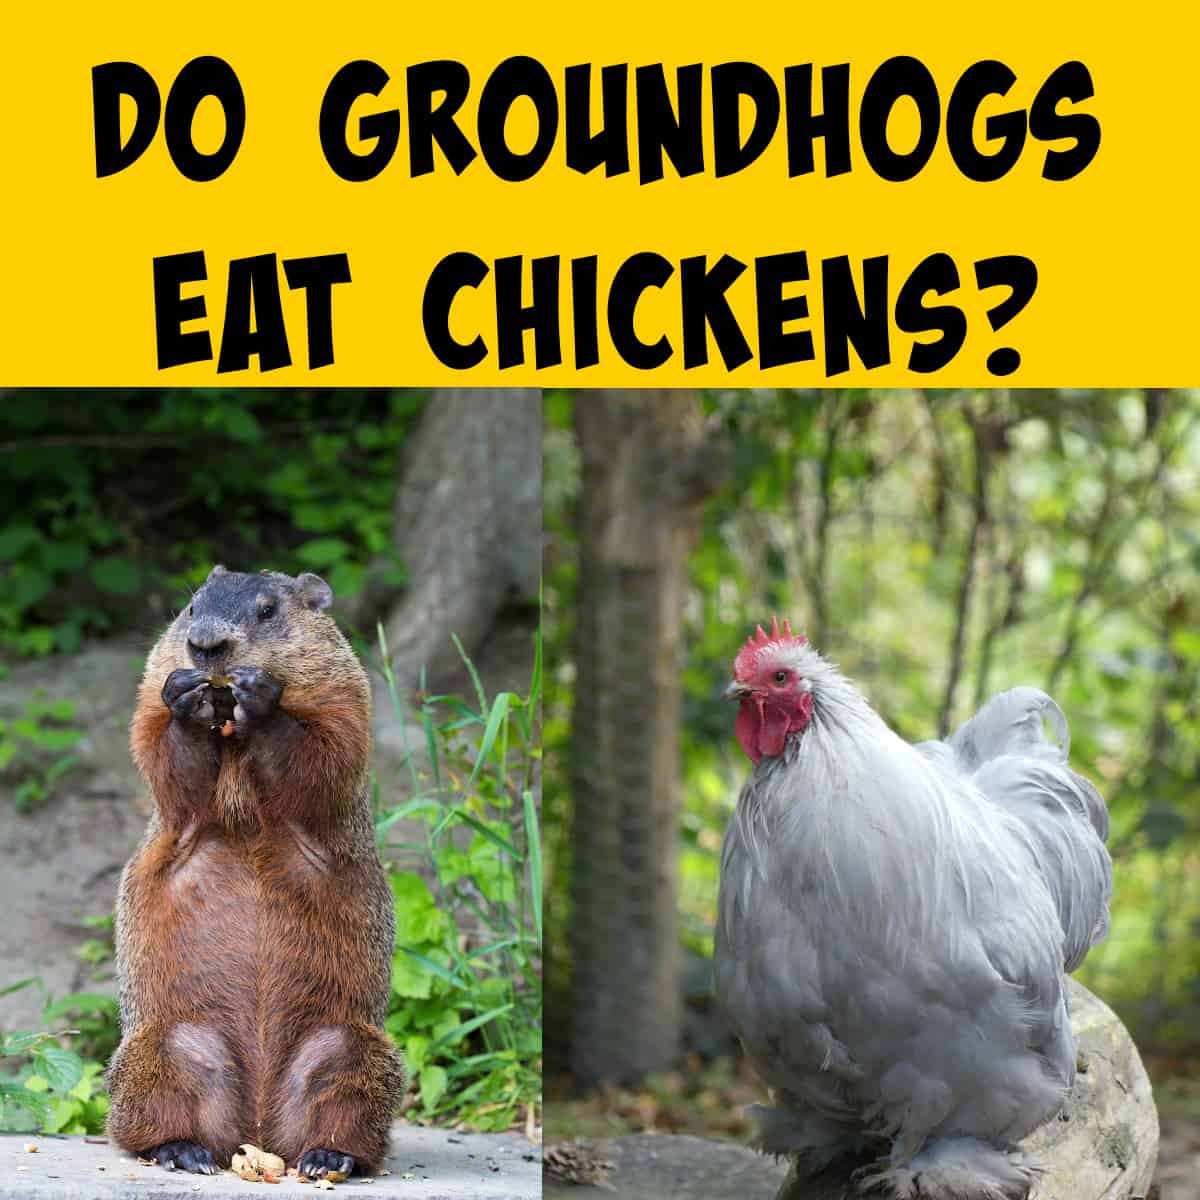 Groundhogs and Chickens